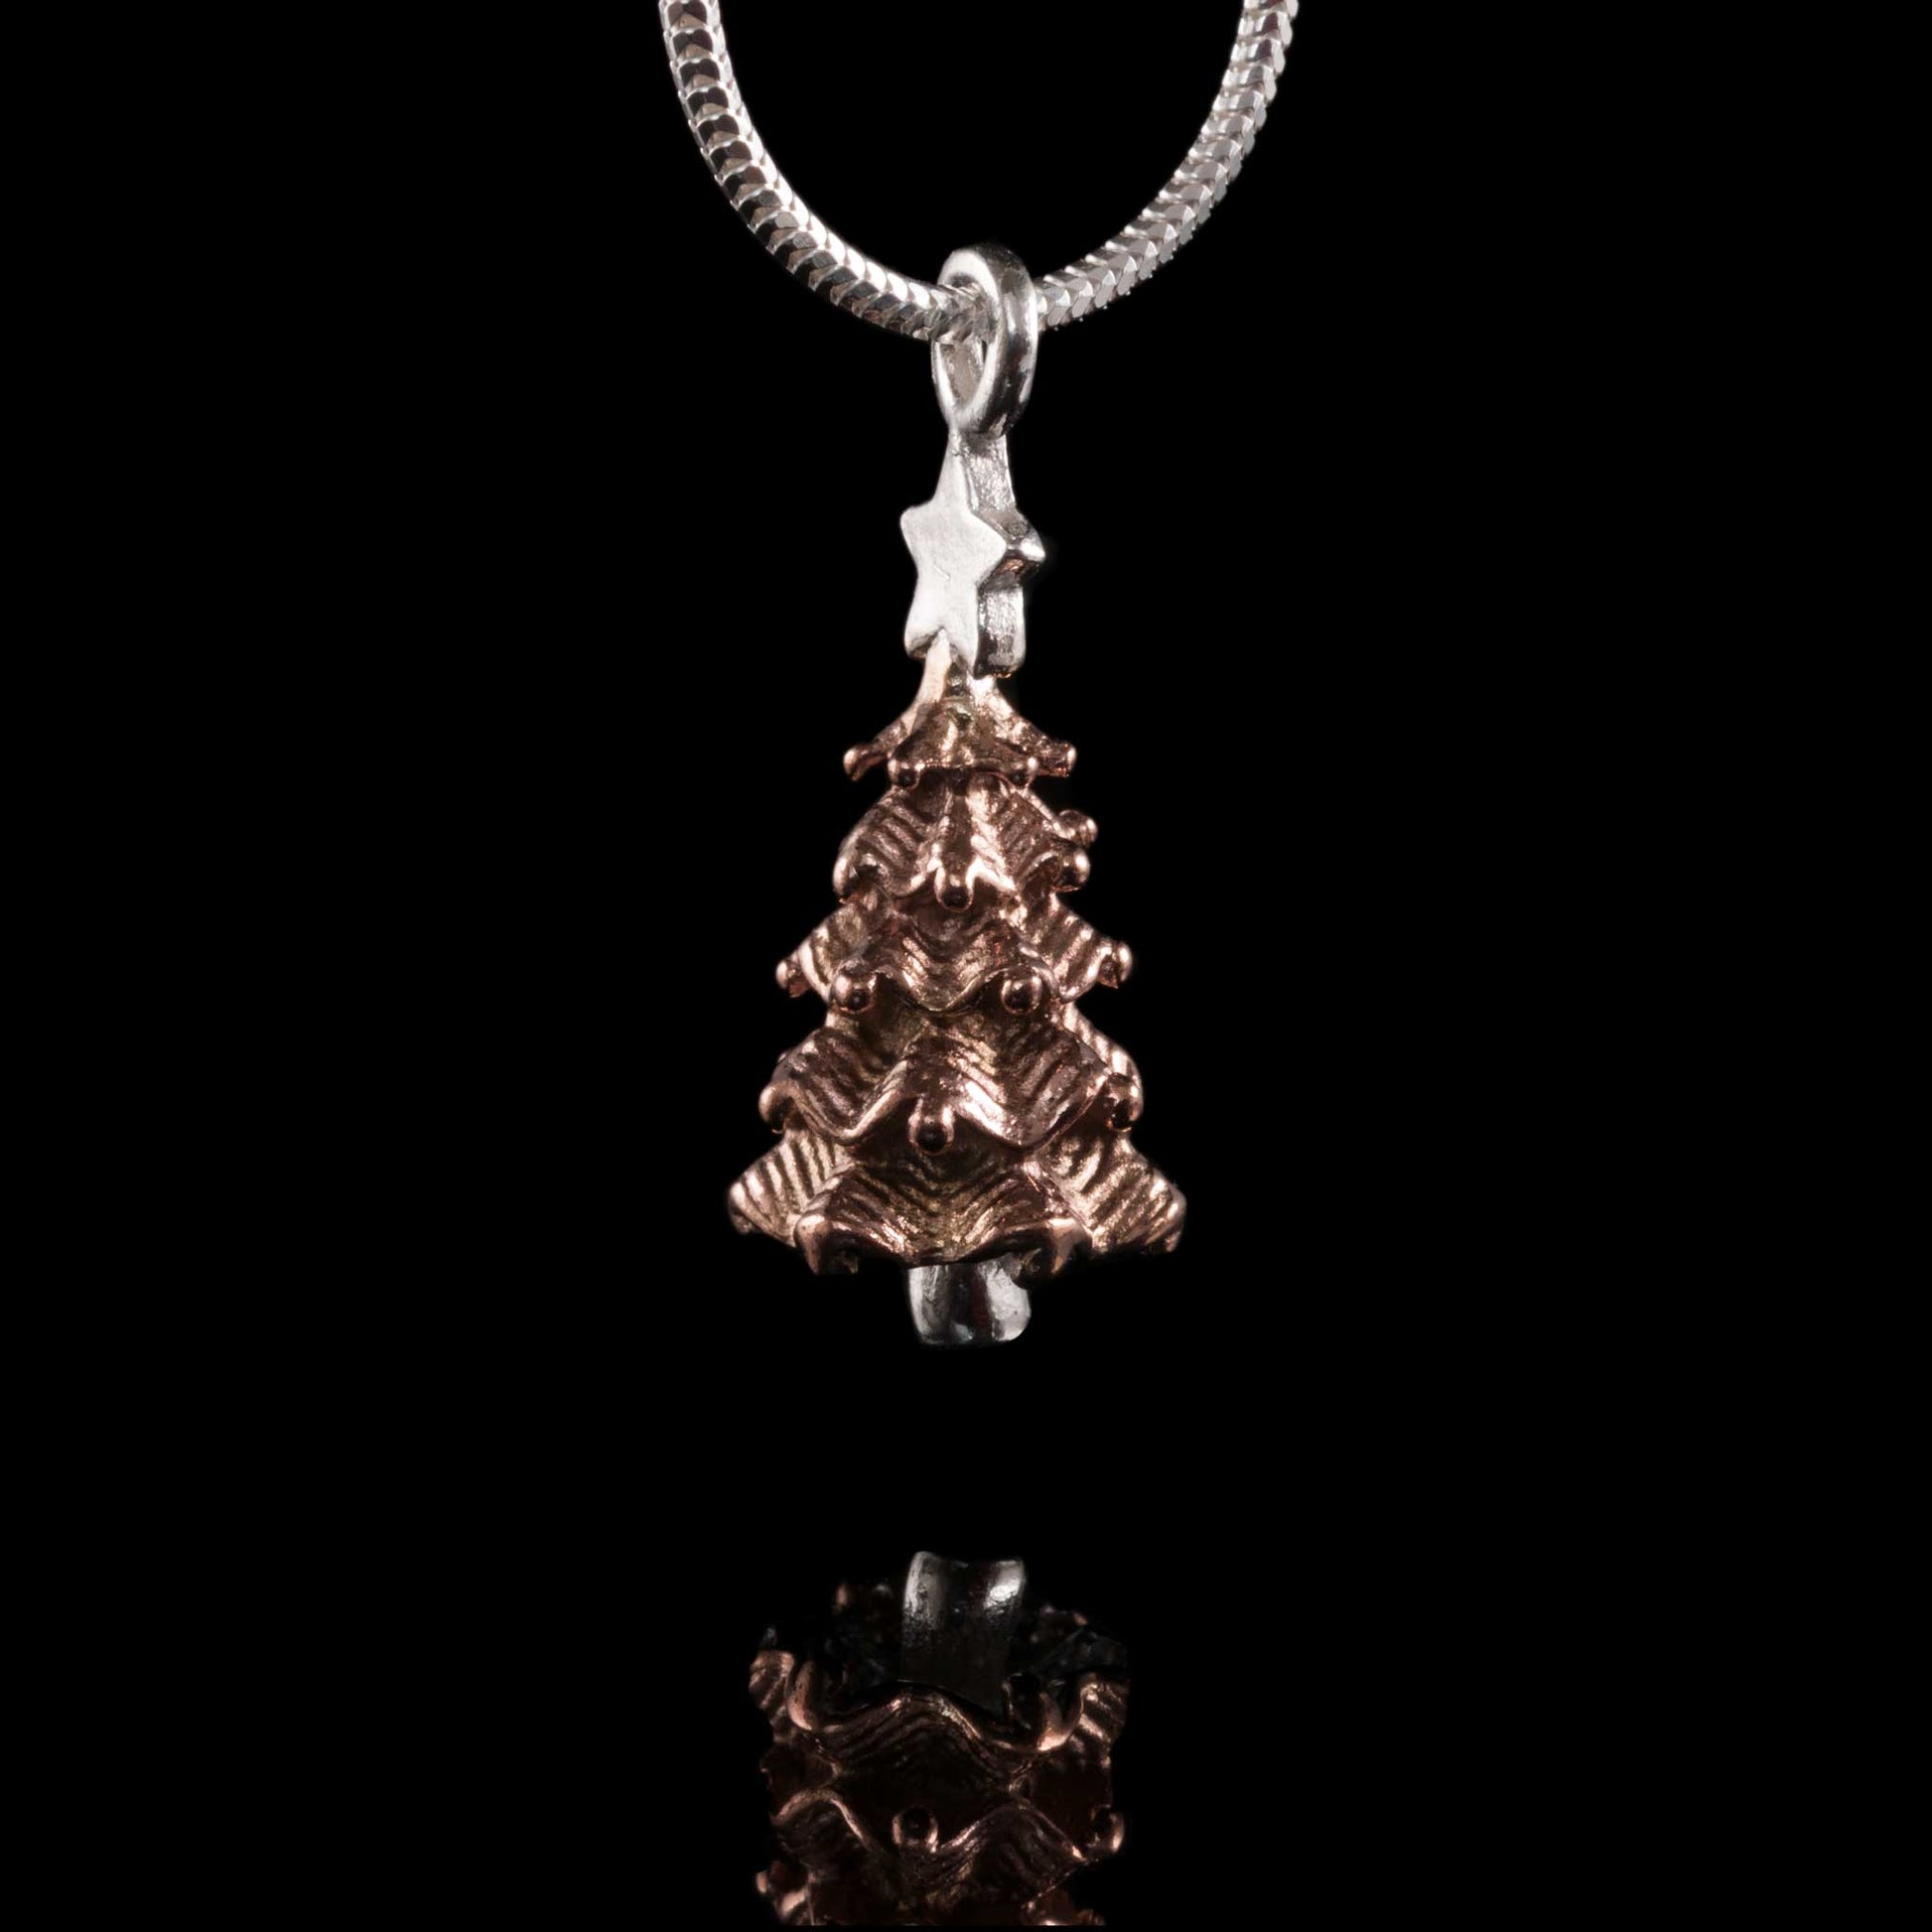 Christmas Tree Silver and Gold Necklace, solid 925 sterling silver with rose gold plate Christmas gift jewellery gift idea.  Christmas tree has a silver star on the top.